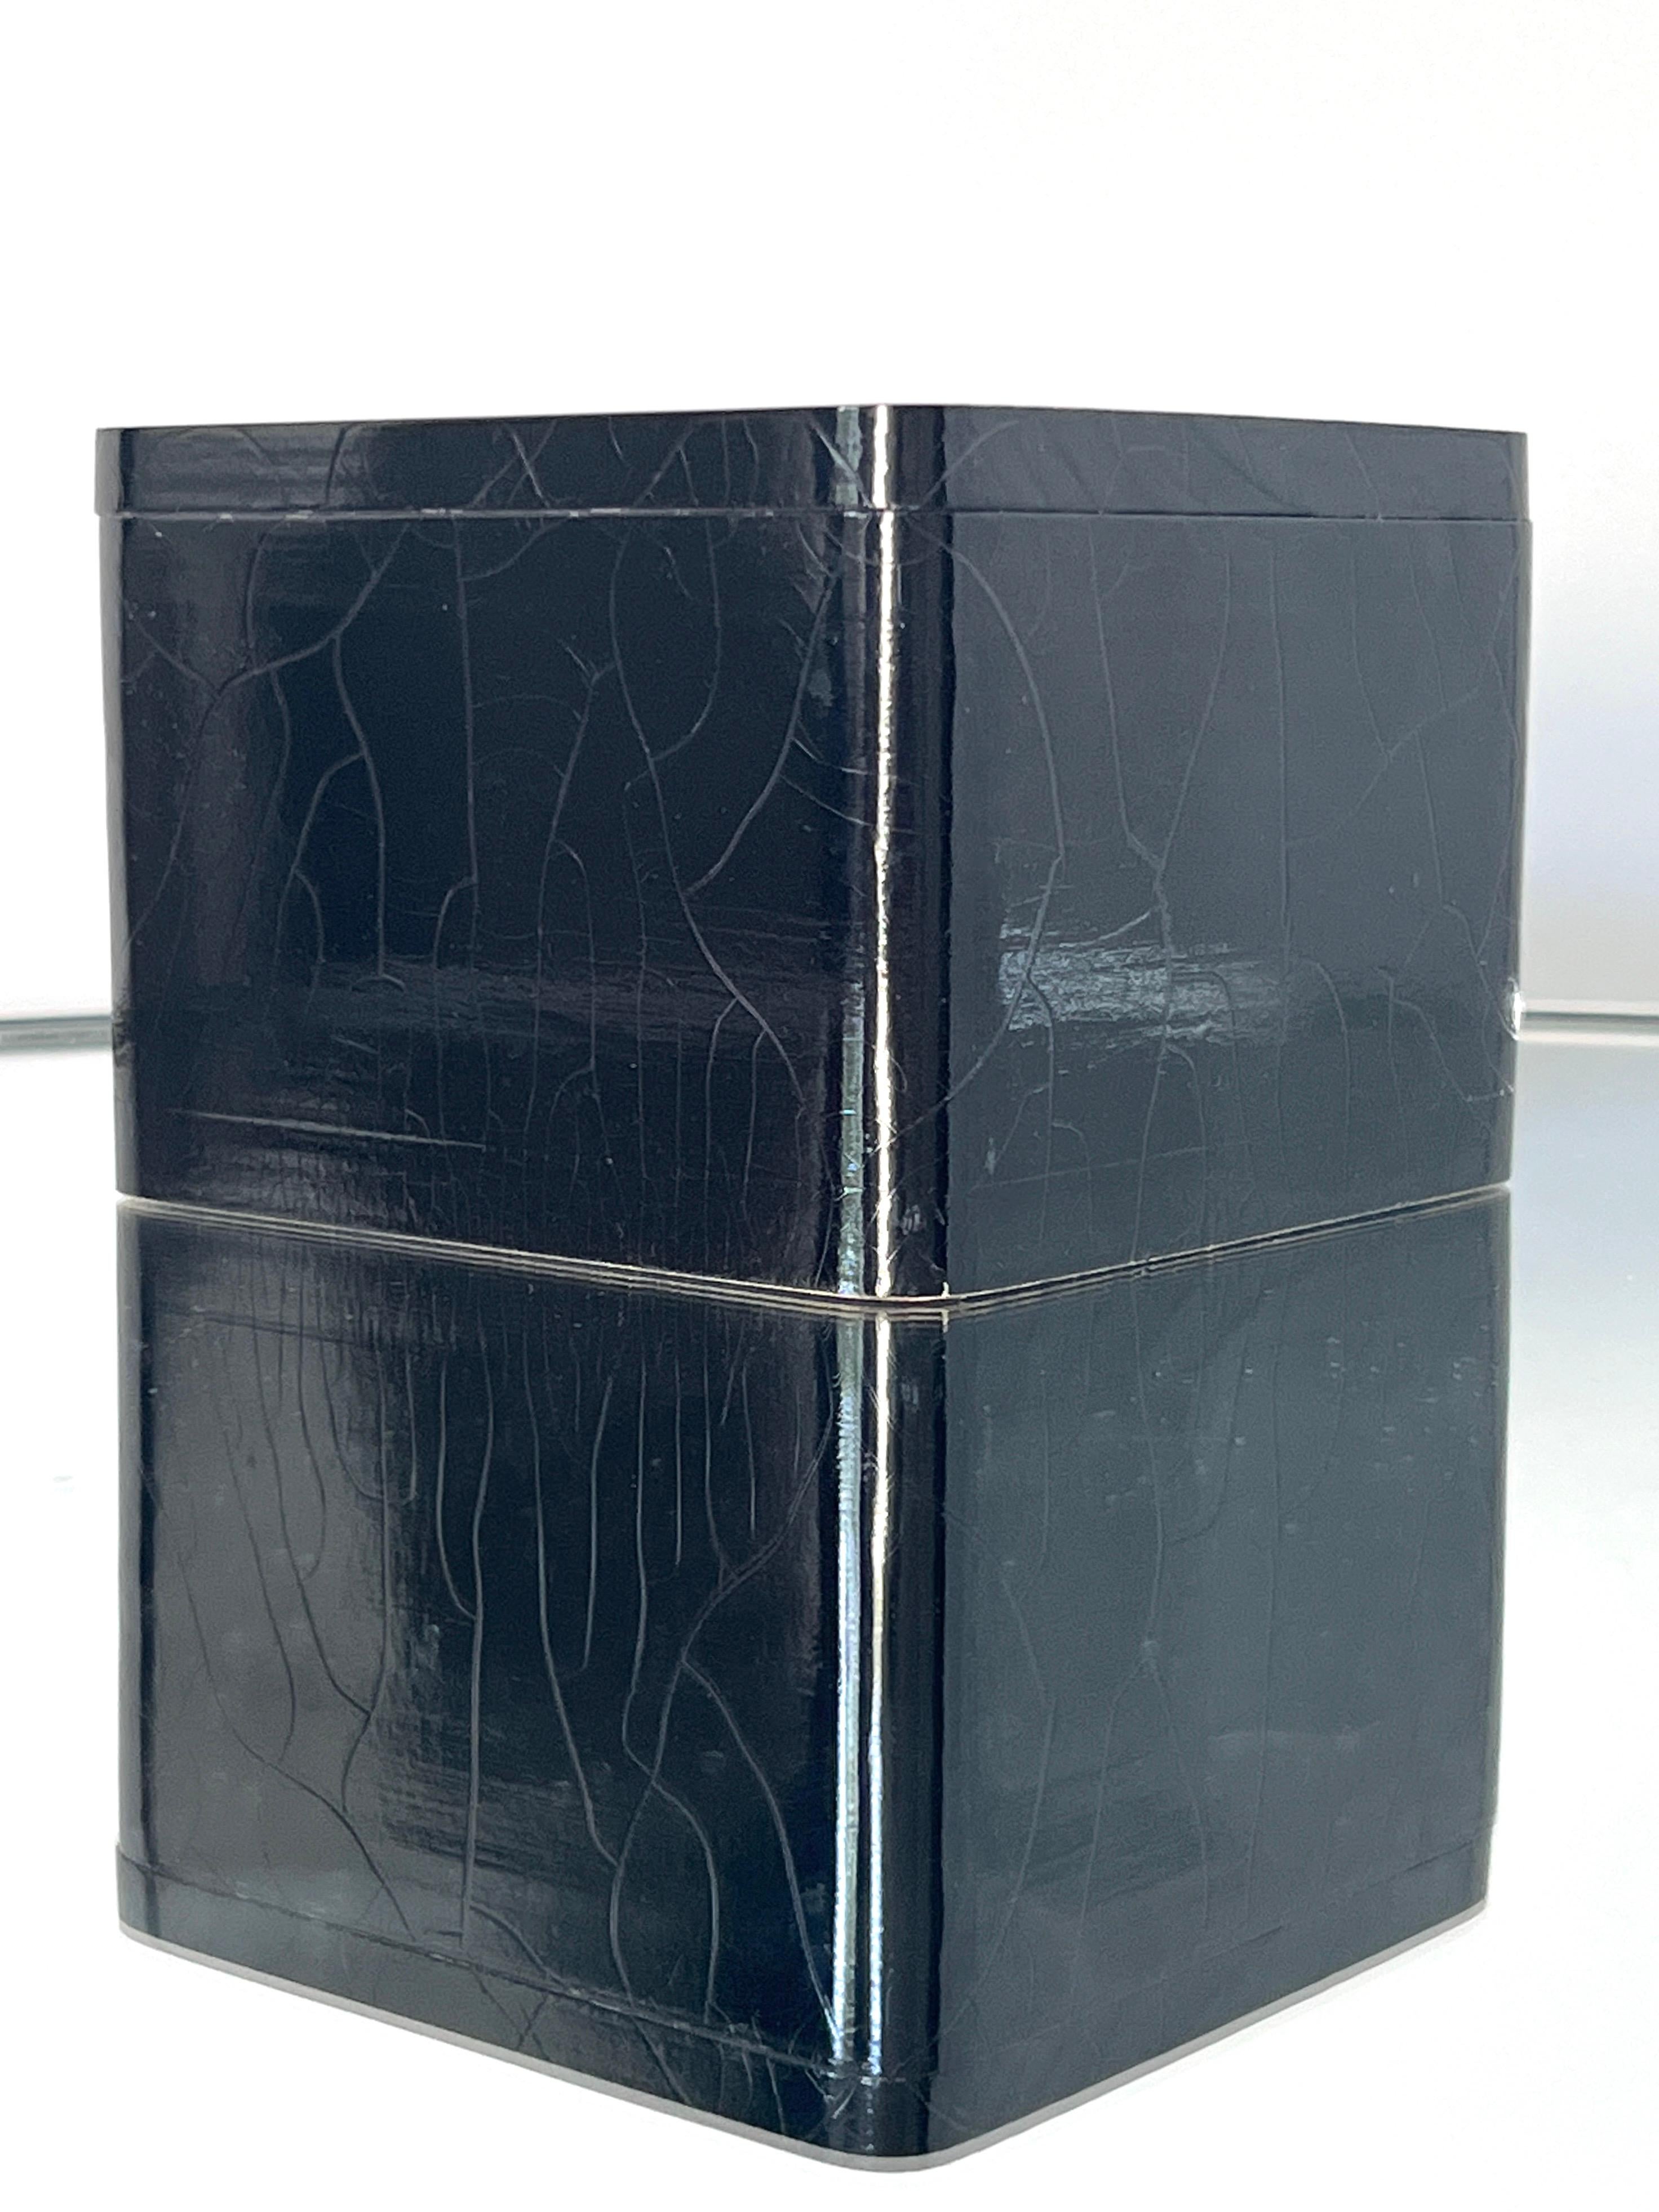 Late 20th Century Vintage Agate Coaster Box Set with Black Lacquered Finish, c. 1970s For Sale